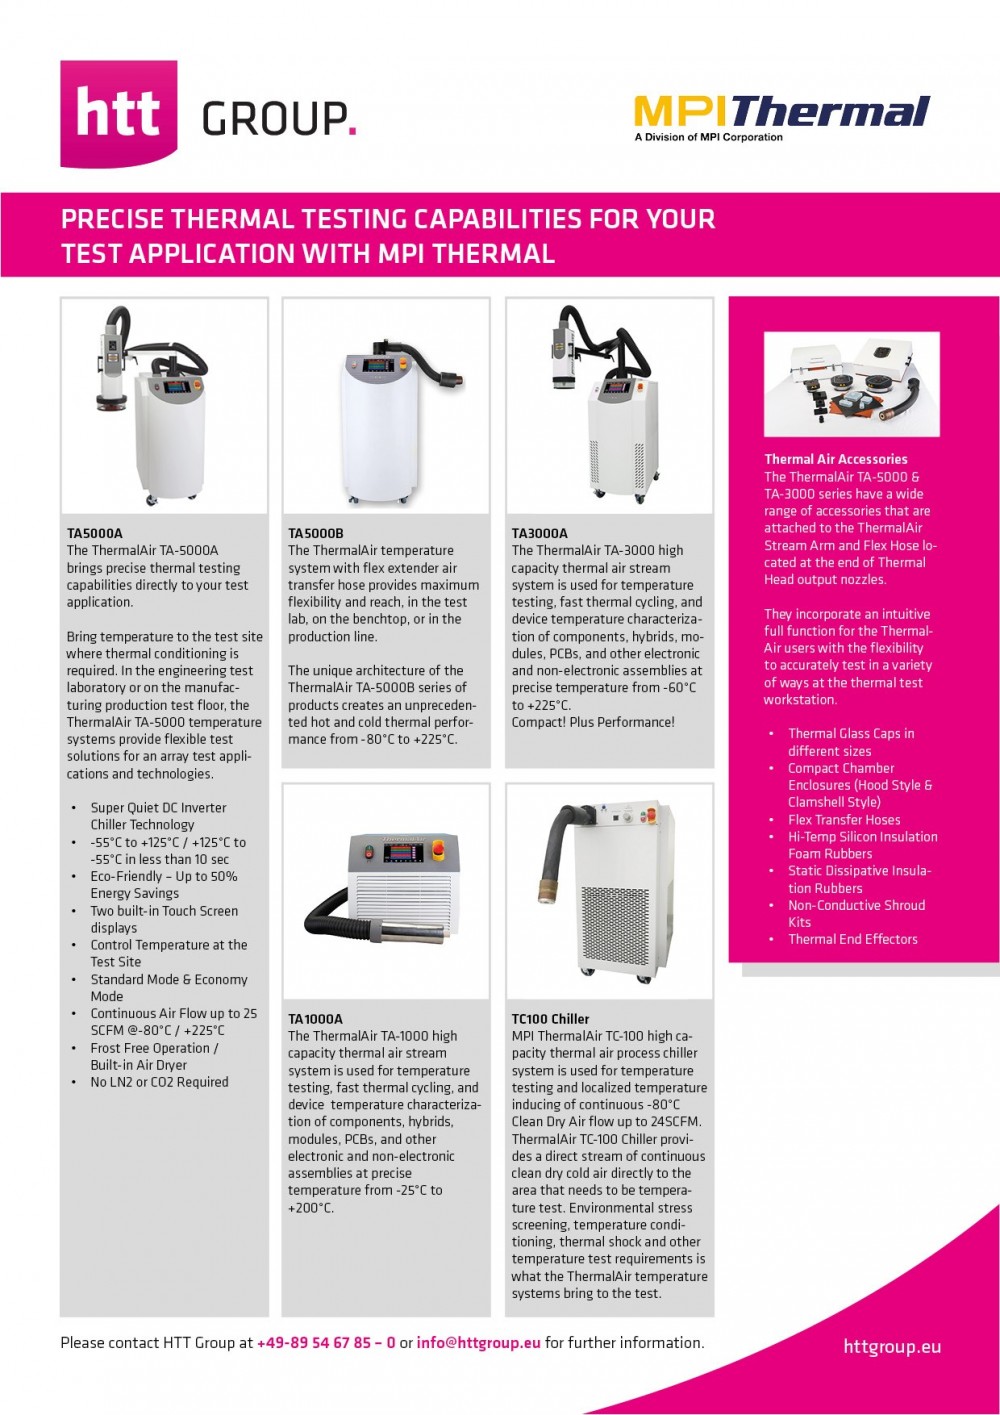 Thermal Air - OVERVIEW